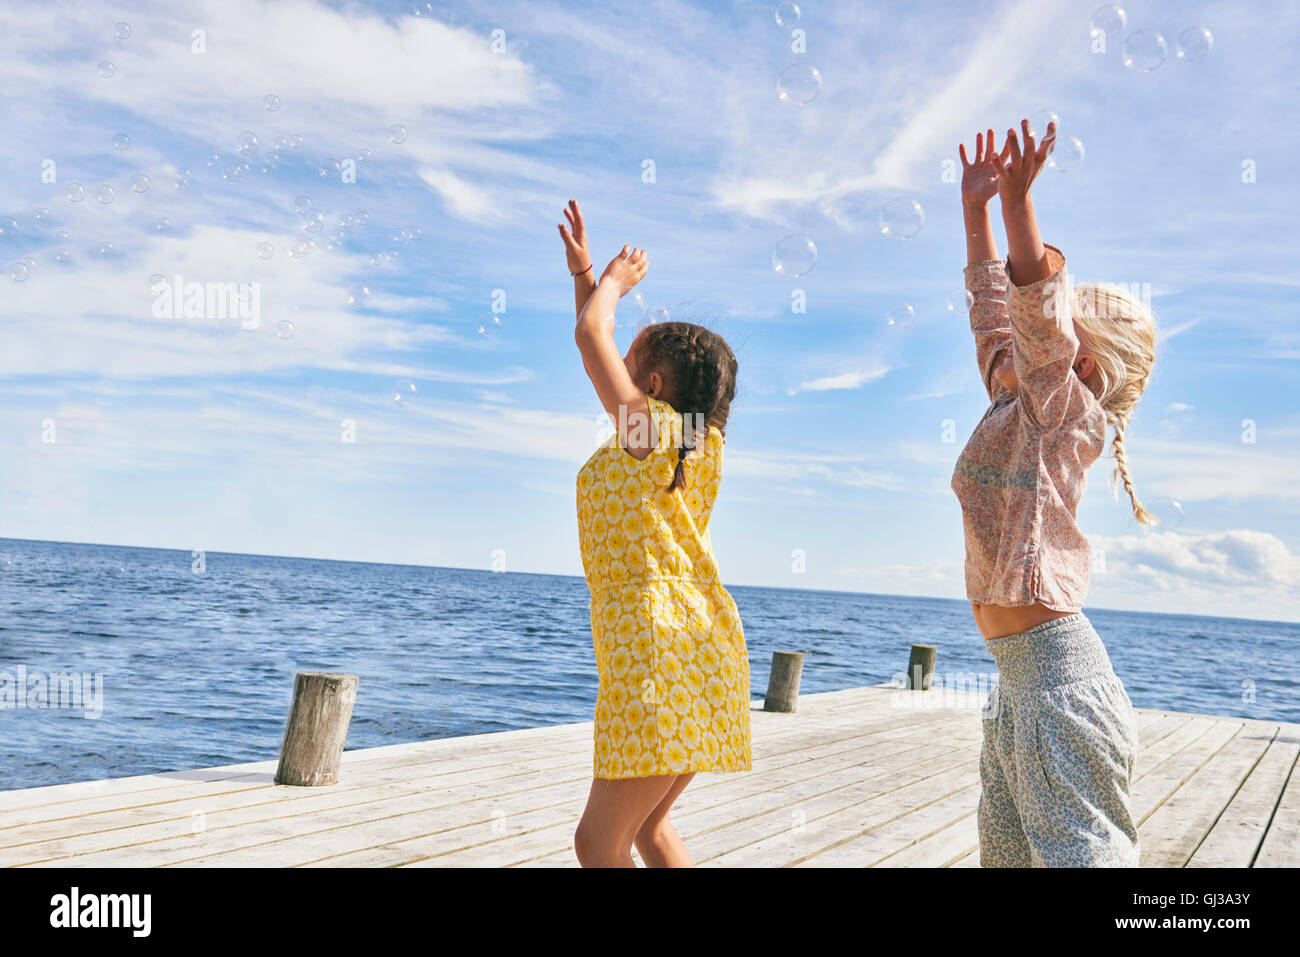 Two young friends playing on wooden pier, reaching for bubbles Stock Photo